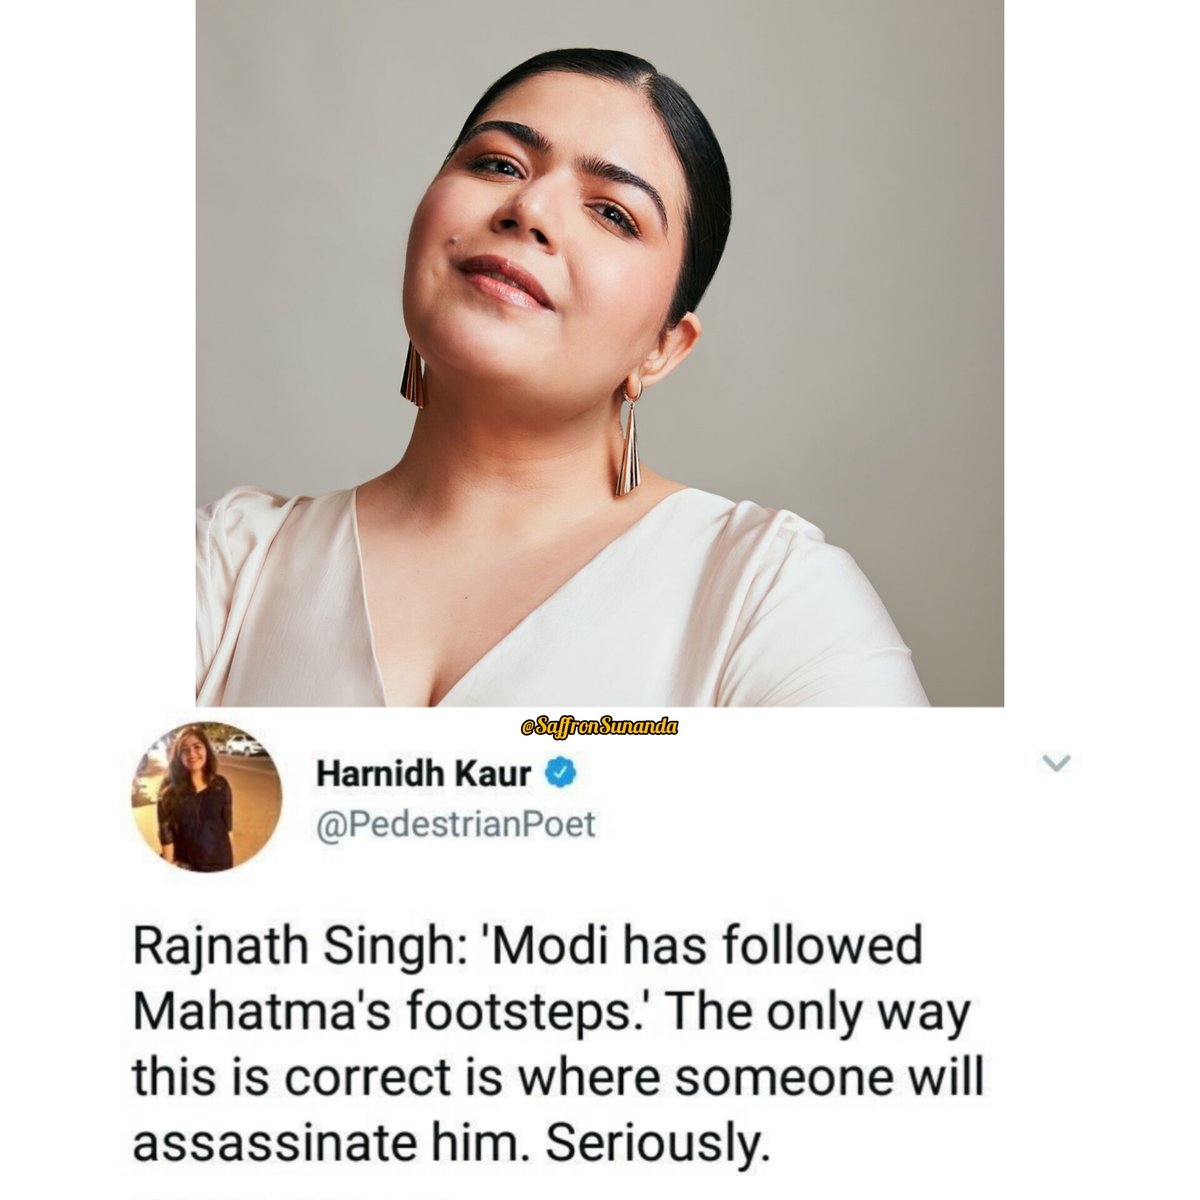 Meet Harnidh Kaur

She is head of funds in wtf fund started by Nikhil Kamath.

She wanted assassination of our Prime Minister Modi ji.

When RWs showed outrage and she deleted her account.

Now she is back with a new account @chiaseedpuddin .

@nikhilkamathcio must look into